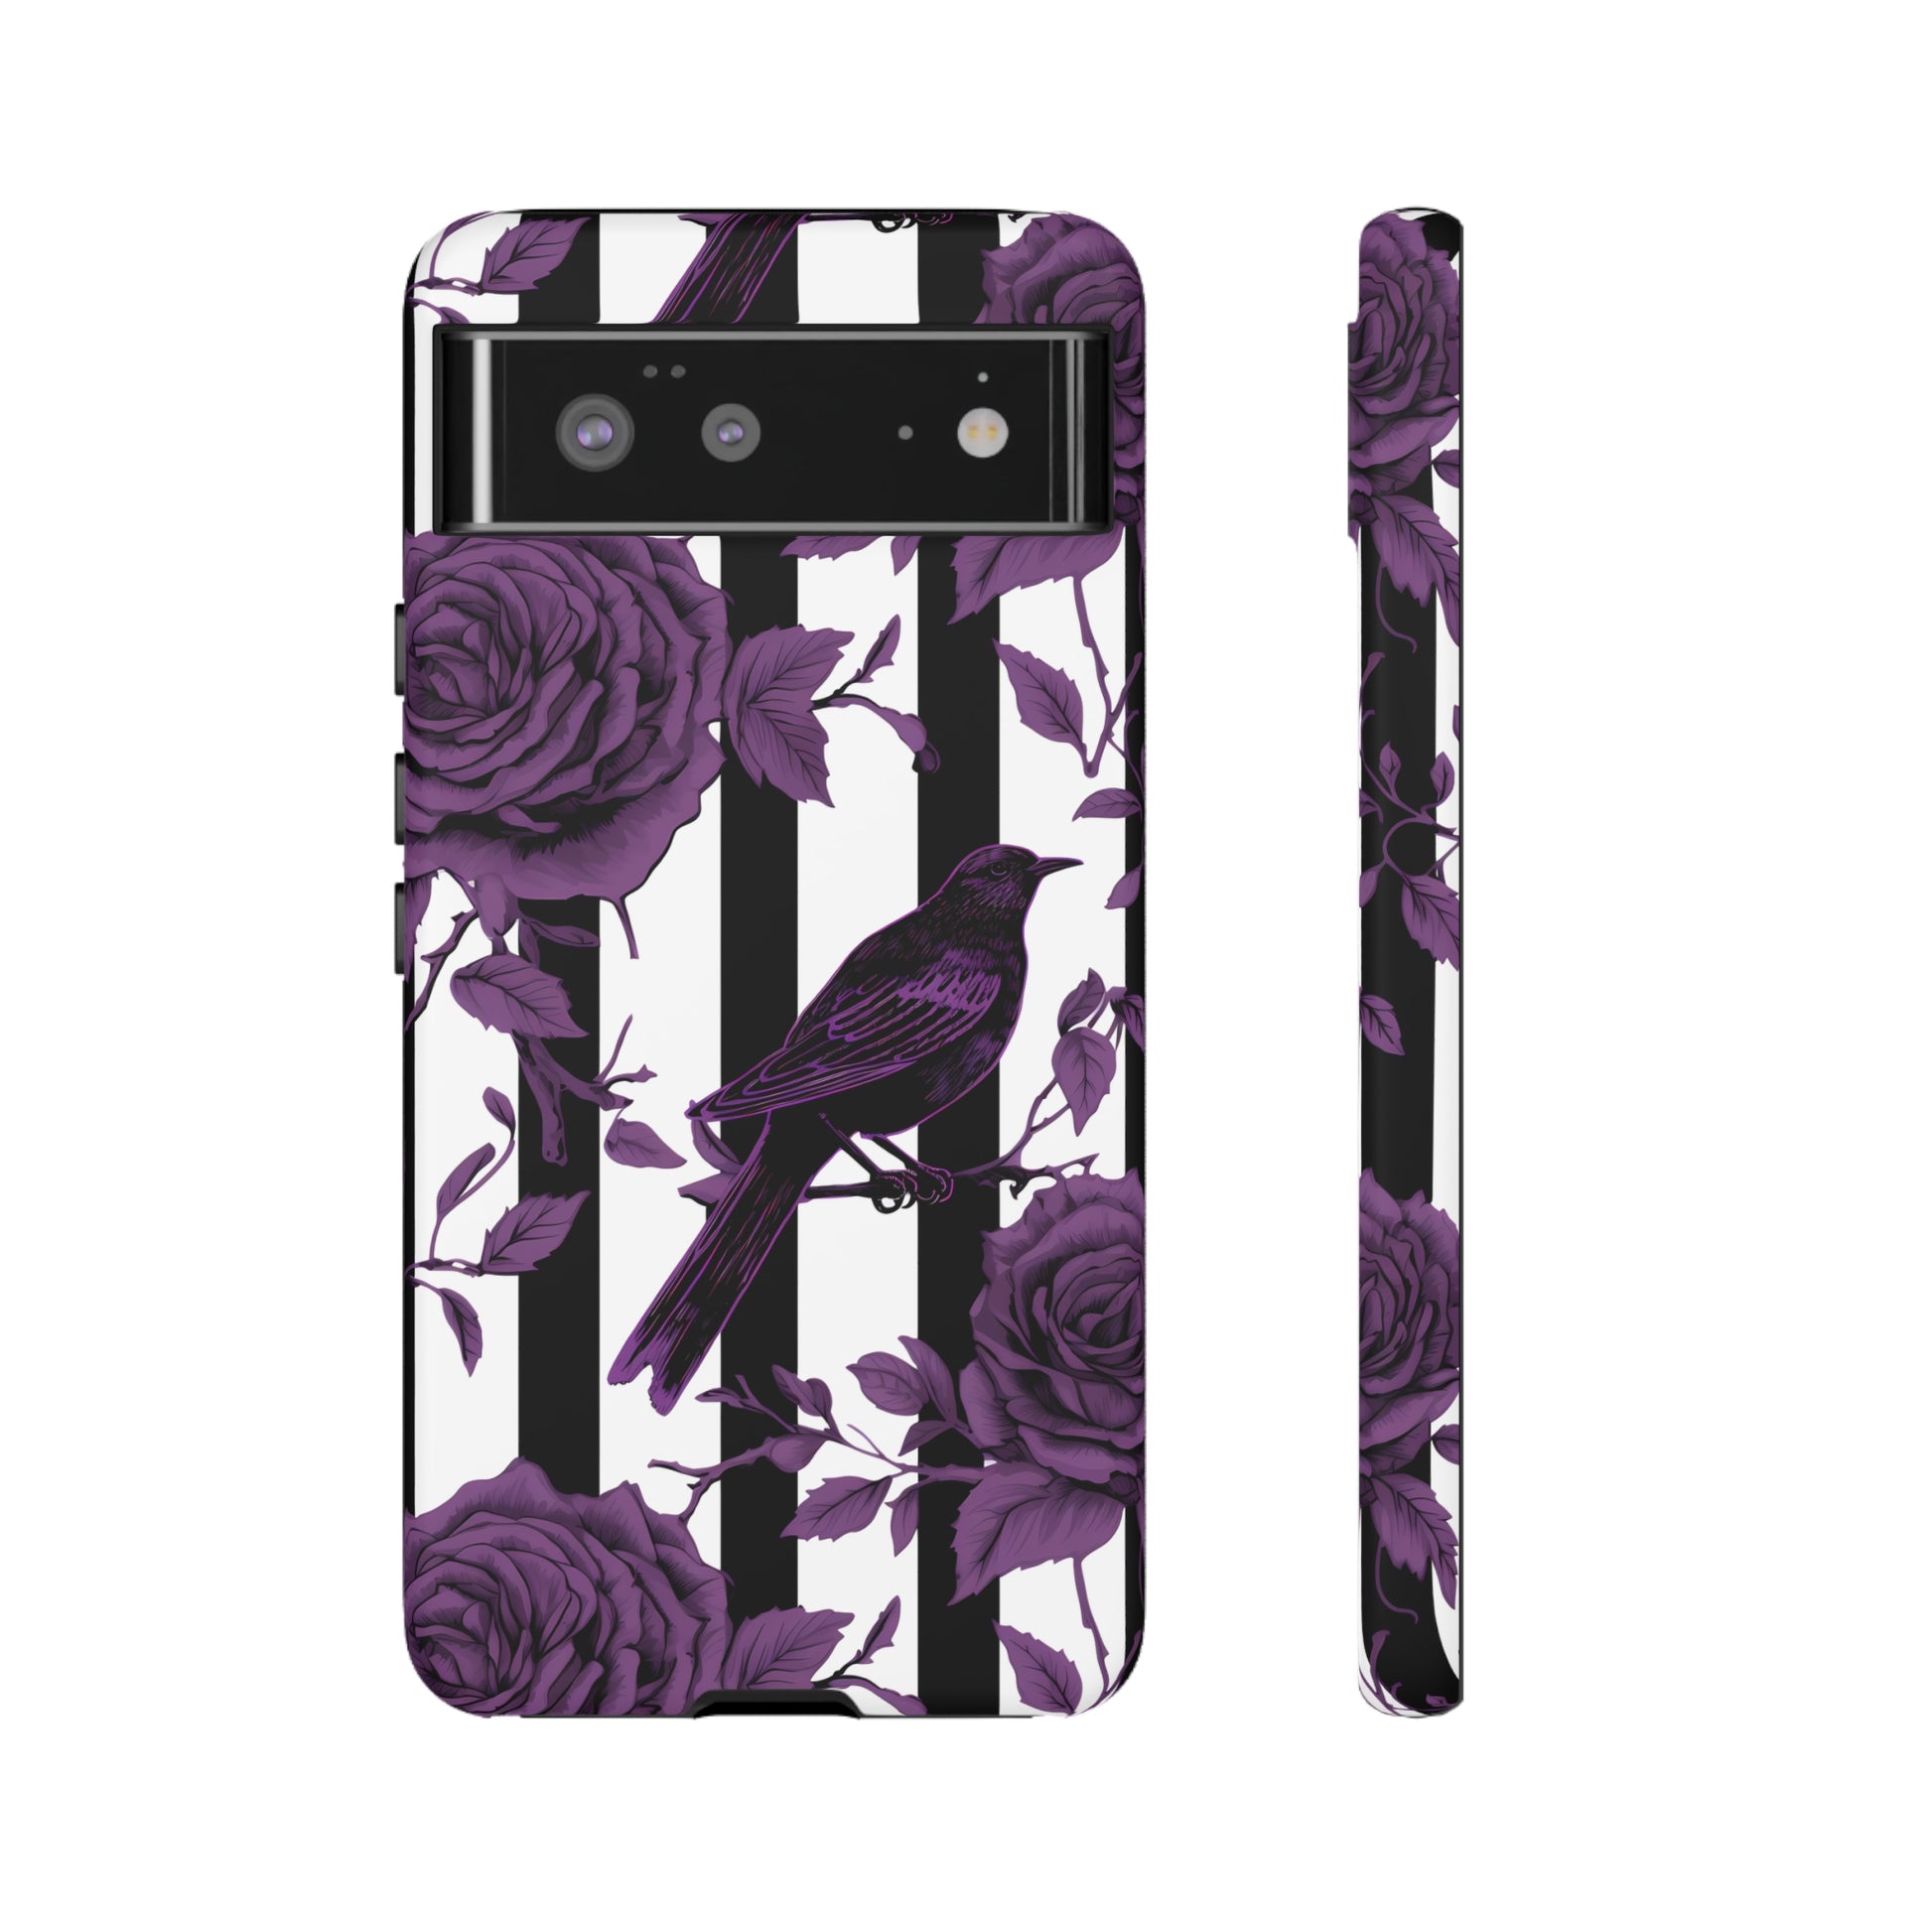 Striped Crows and Roses Tough Cases for iPhone Samsung Google PhonesPhone CaseVTZdesignsGoogle Pixel 6MatteAccessoriescrowsGlossy